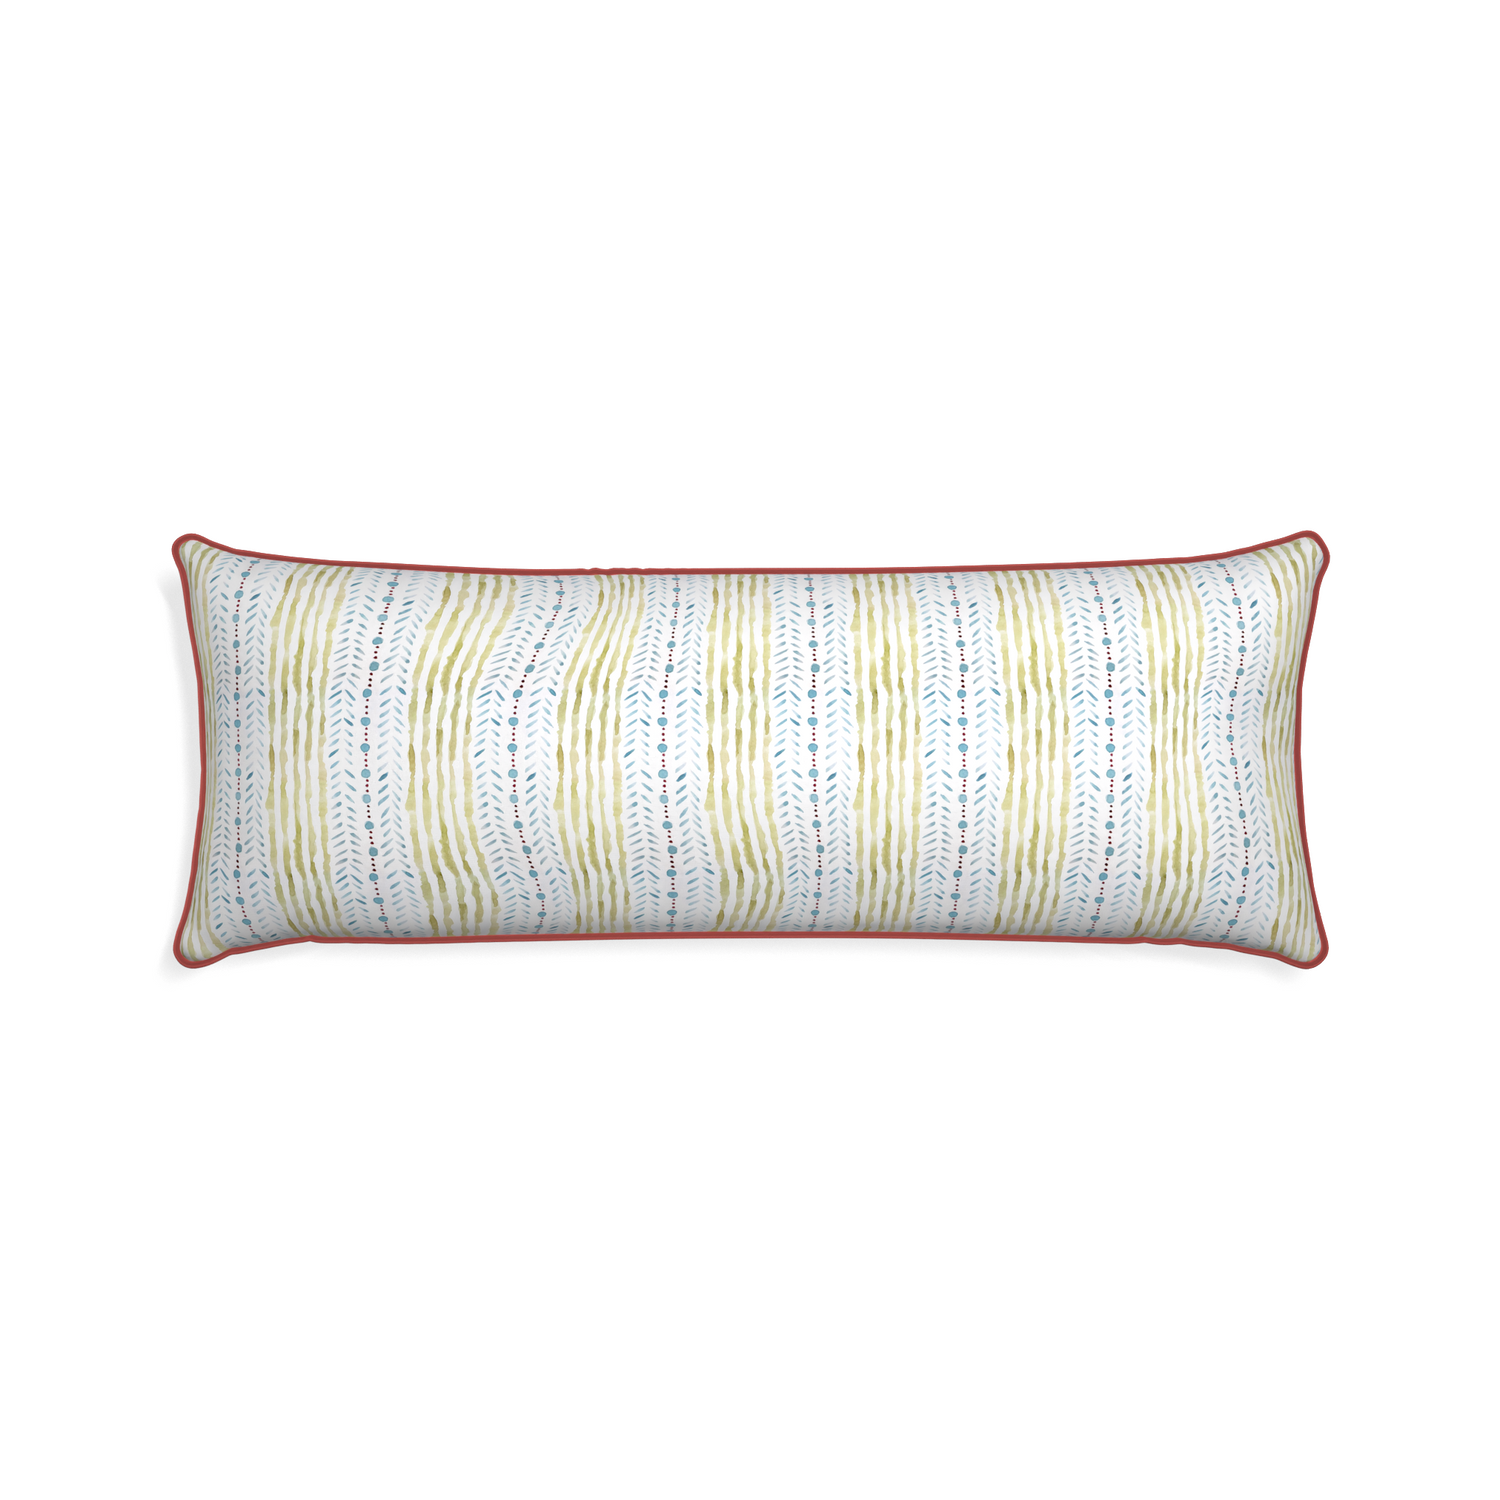 Xl-lumbar julia custom blue & green stripedpillow with c piping on white background